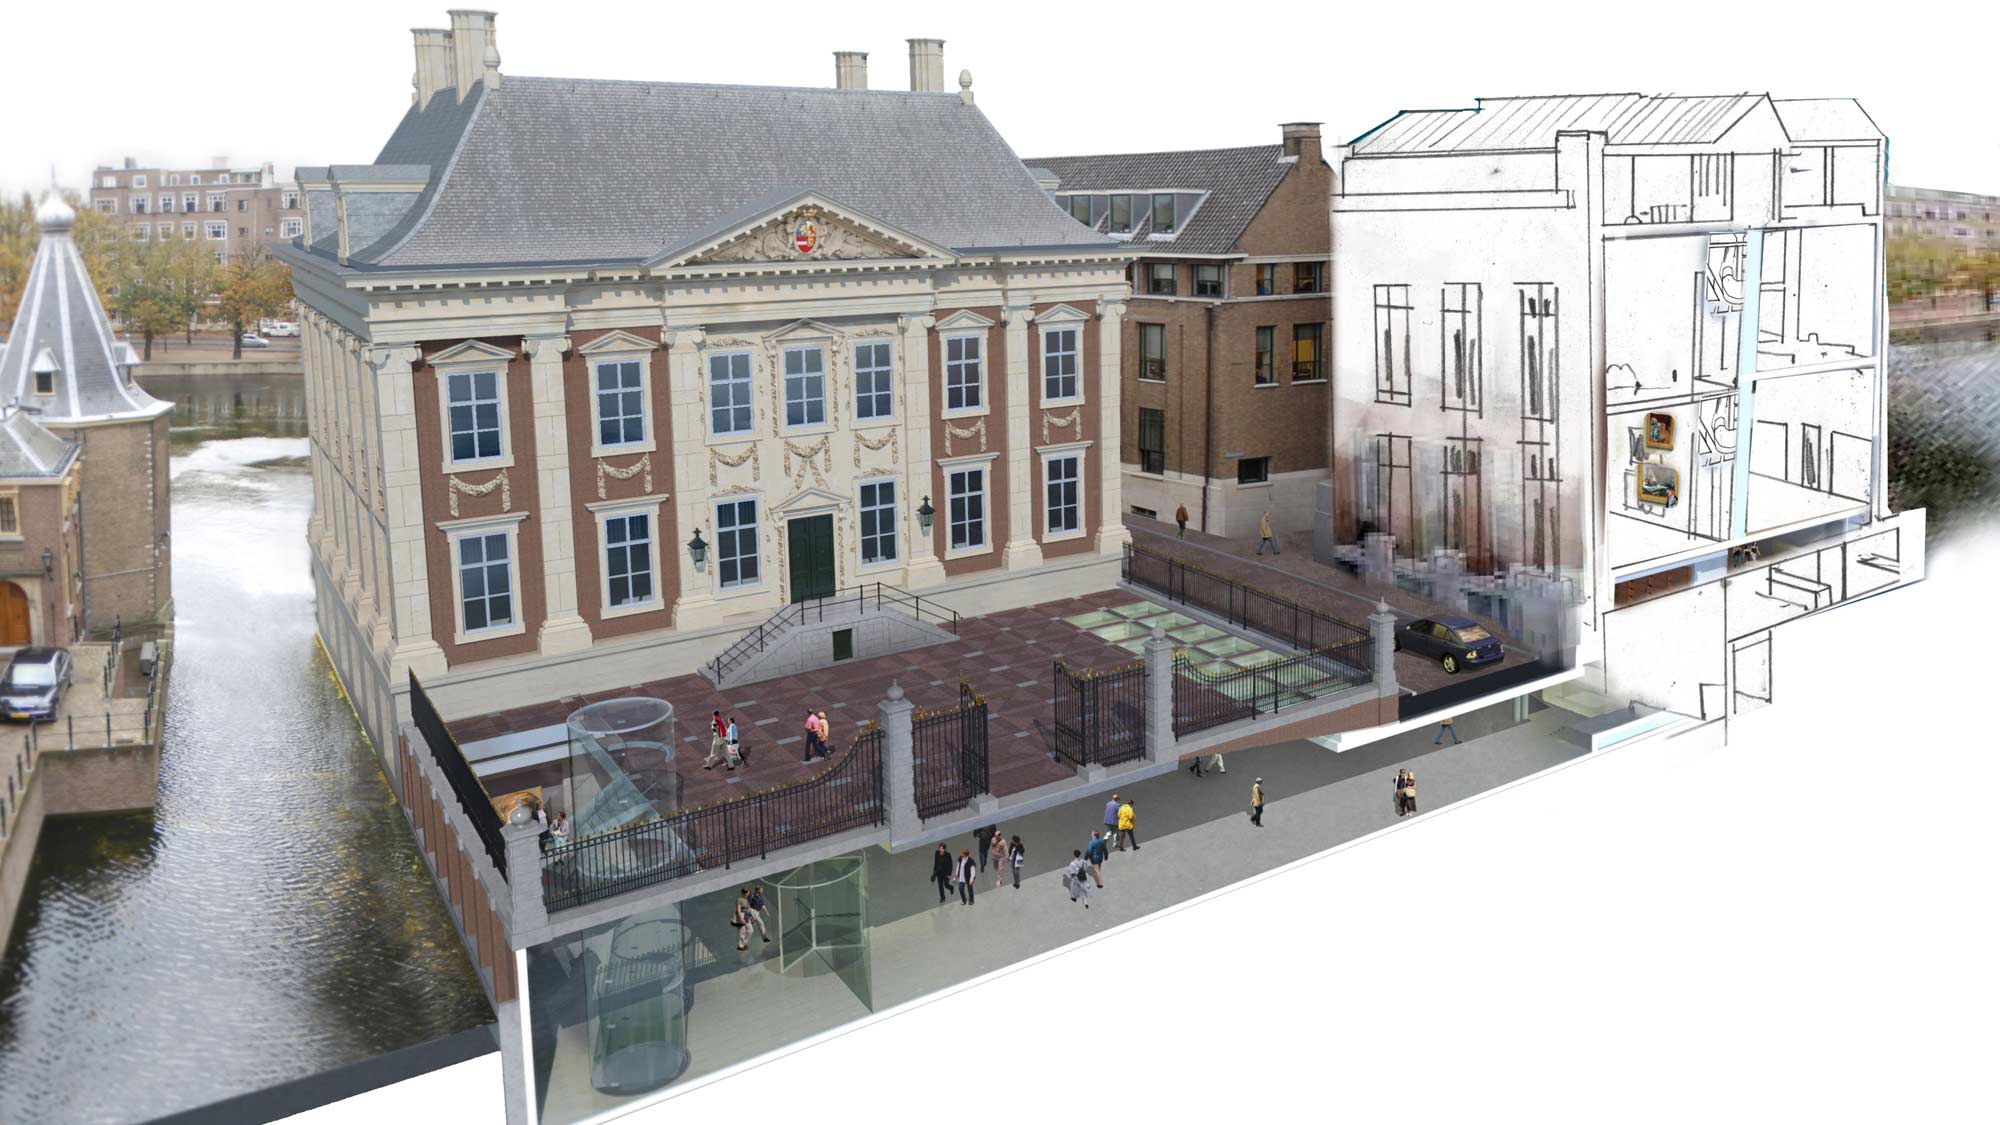 We’ve given Mauritshuis an invisible facelift to improve the visitor experience